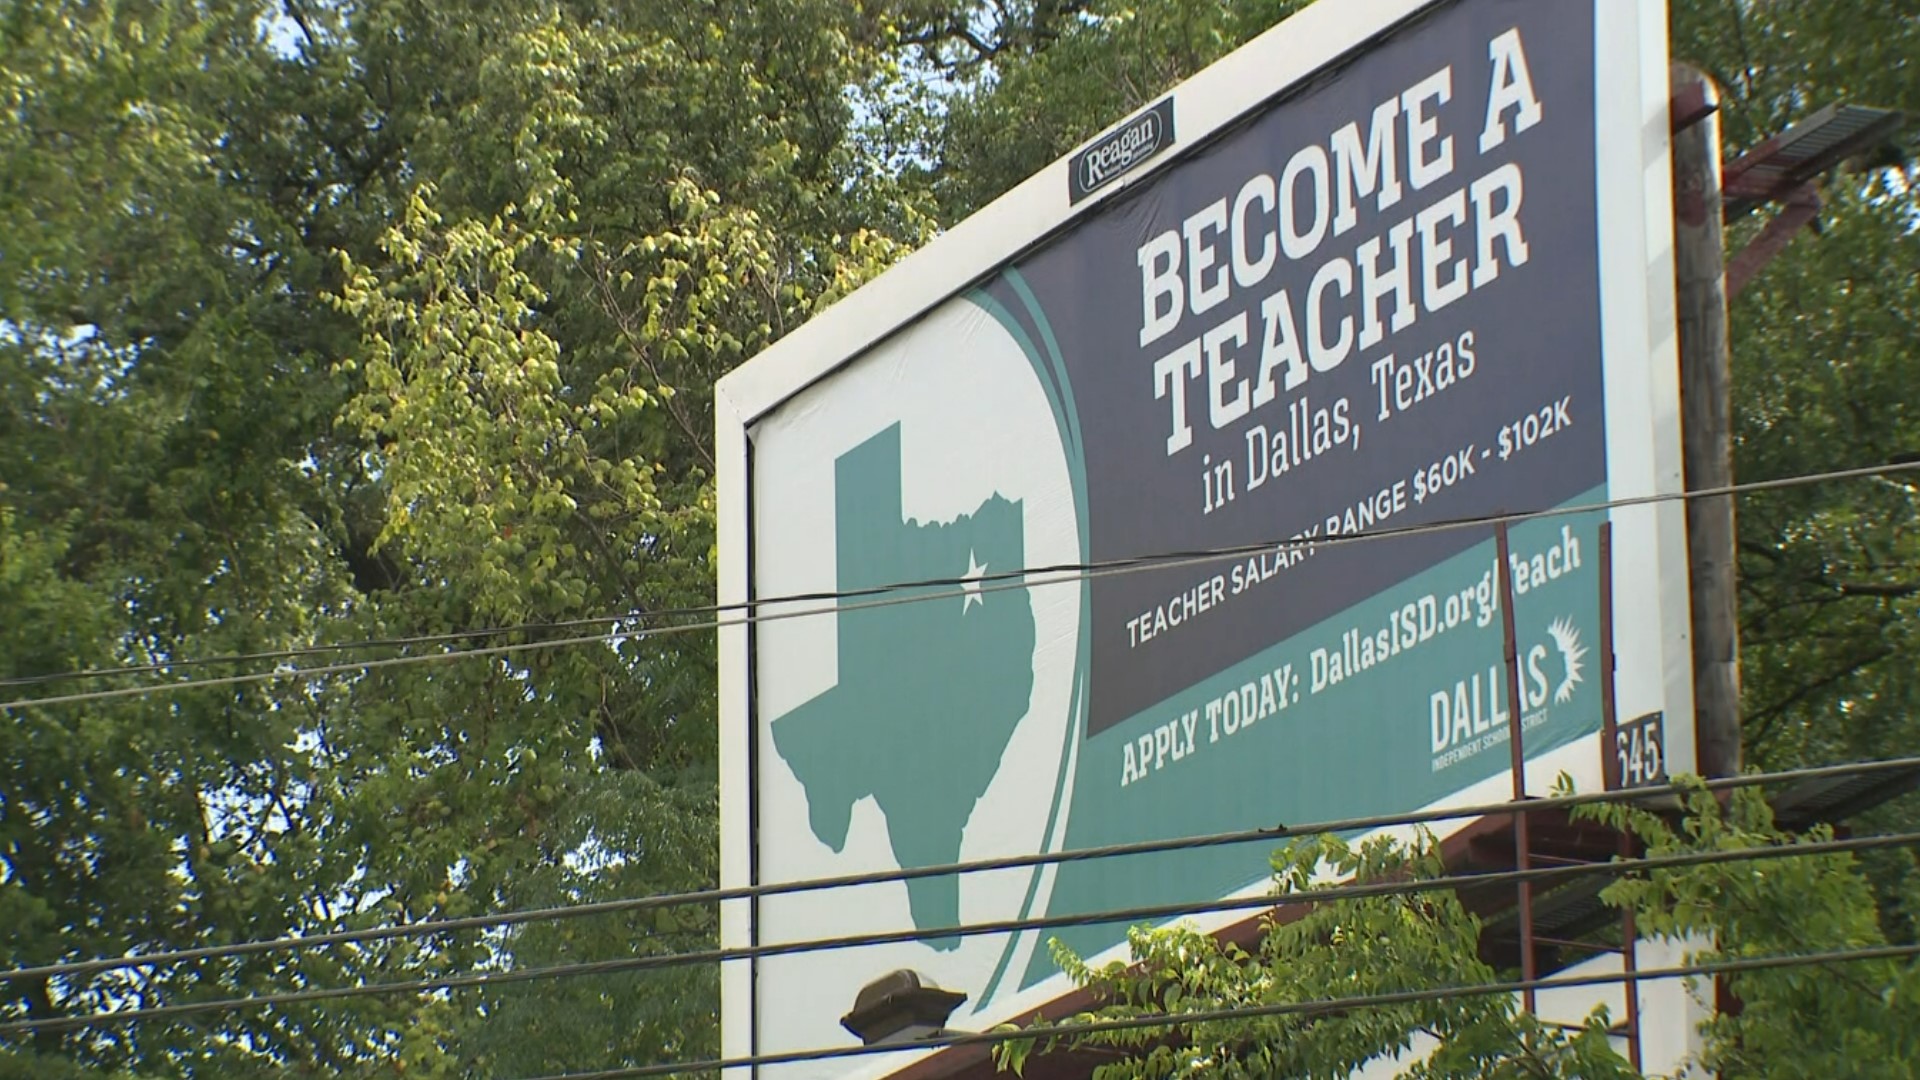 Billboards in Austin seem to be recruiting Austin-area teachers for the North Texas school district.